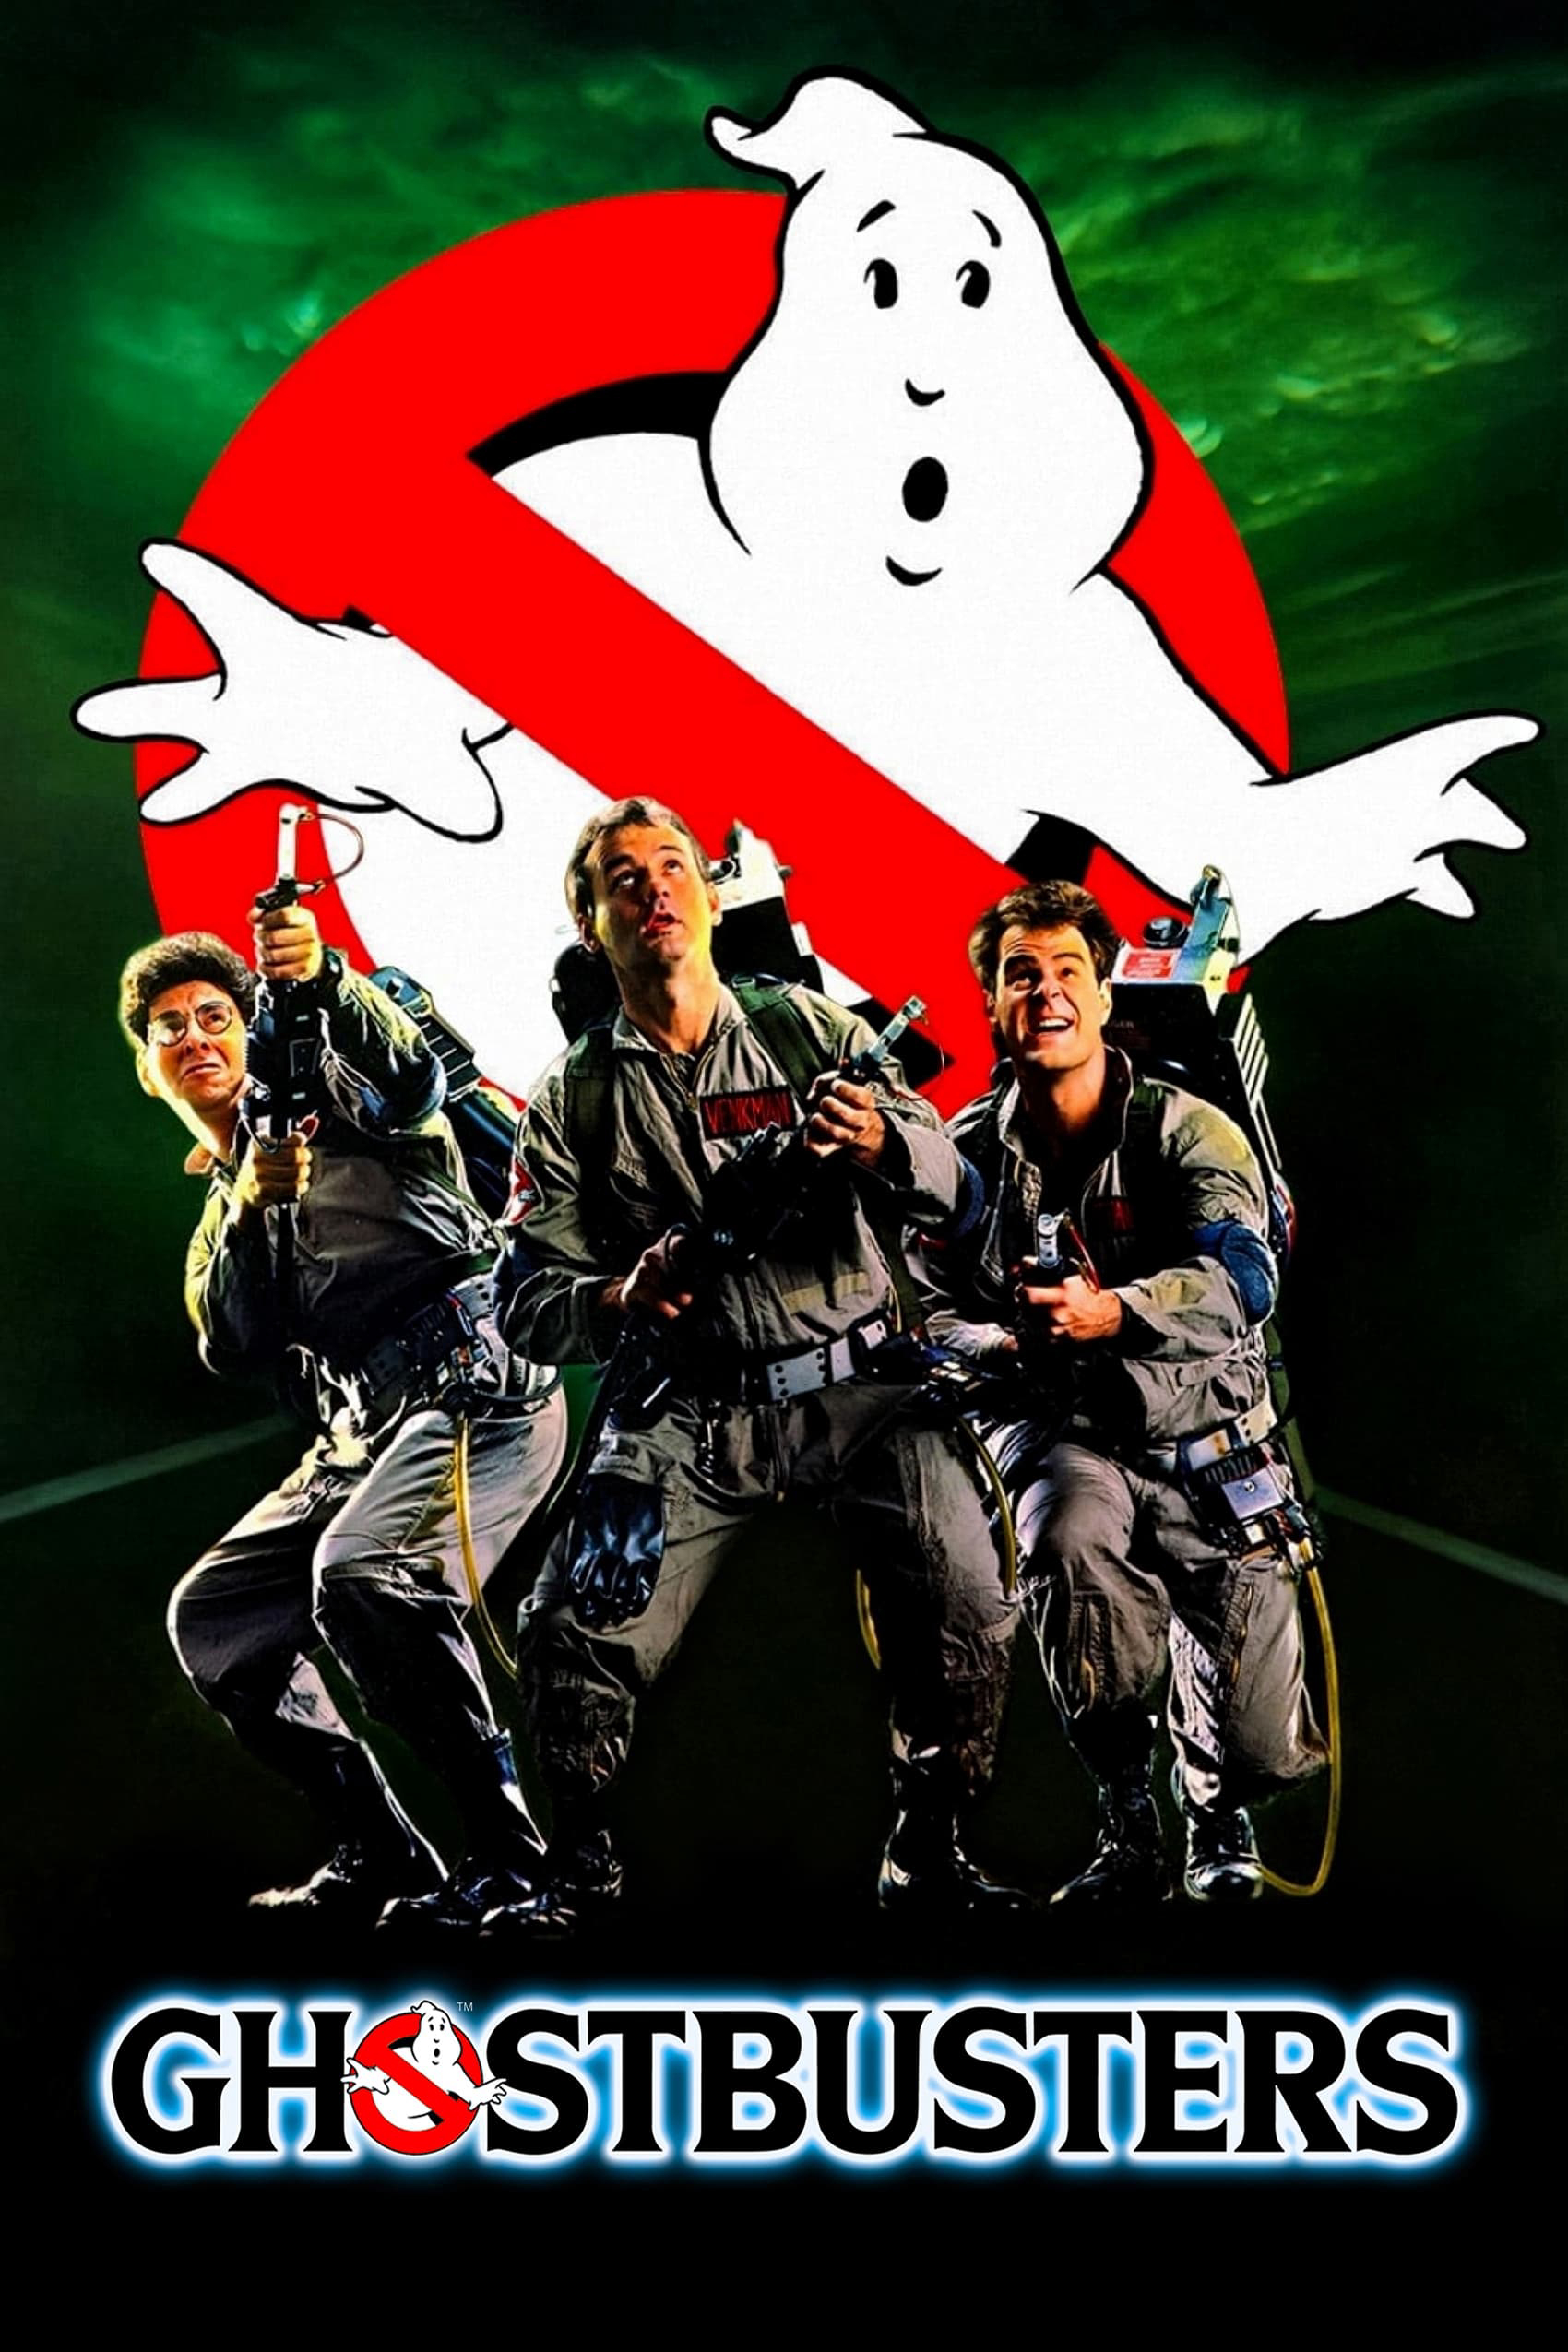 Banner Phim Ghostbusters (Ghostbusters)